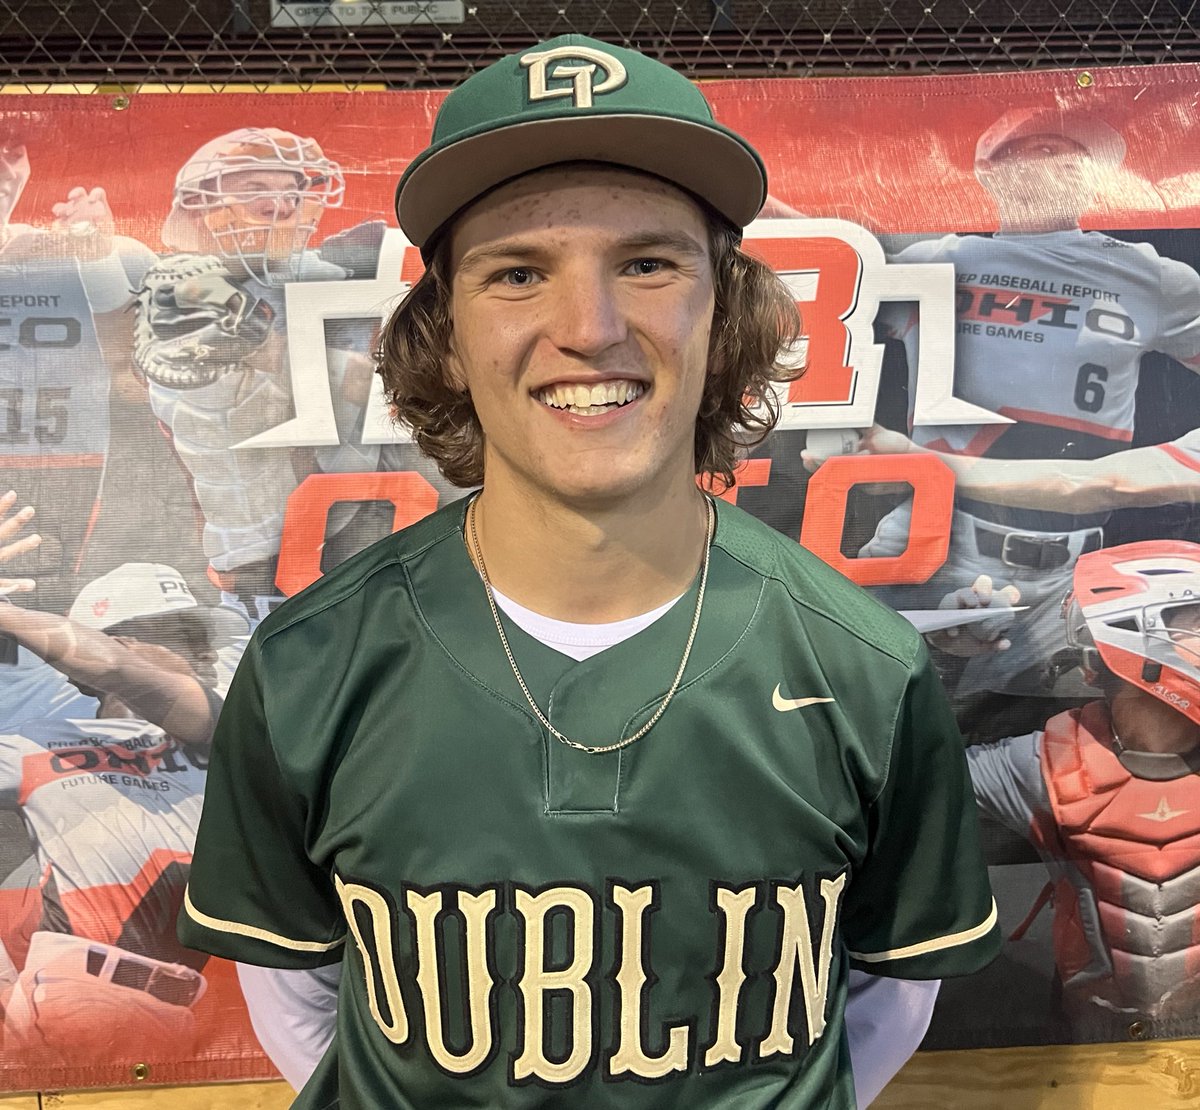 @PirateBSB @DubJeromeBSBL @MaxSwift24 @ColeEstep13 @ethanprice_6 ⭐️Player of the Game⭐️ Grant Sargel from @DubJeromeBSBL is the player of the game after a great performance at the plate bringing in a handful of RBI’s for the Celtics. #BeSeen #SpringHSClassic #RoadToCanalPark